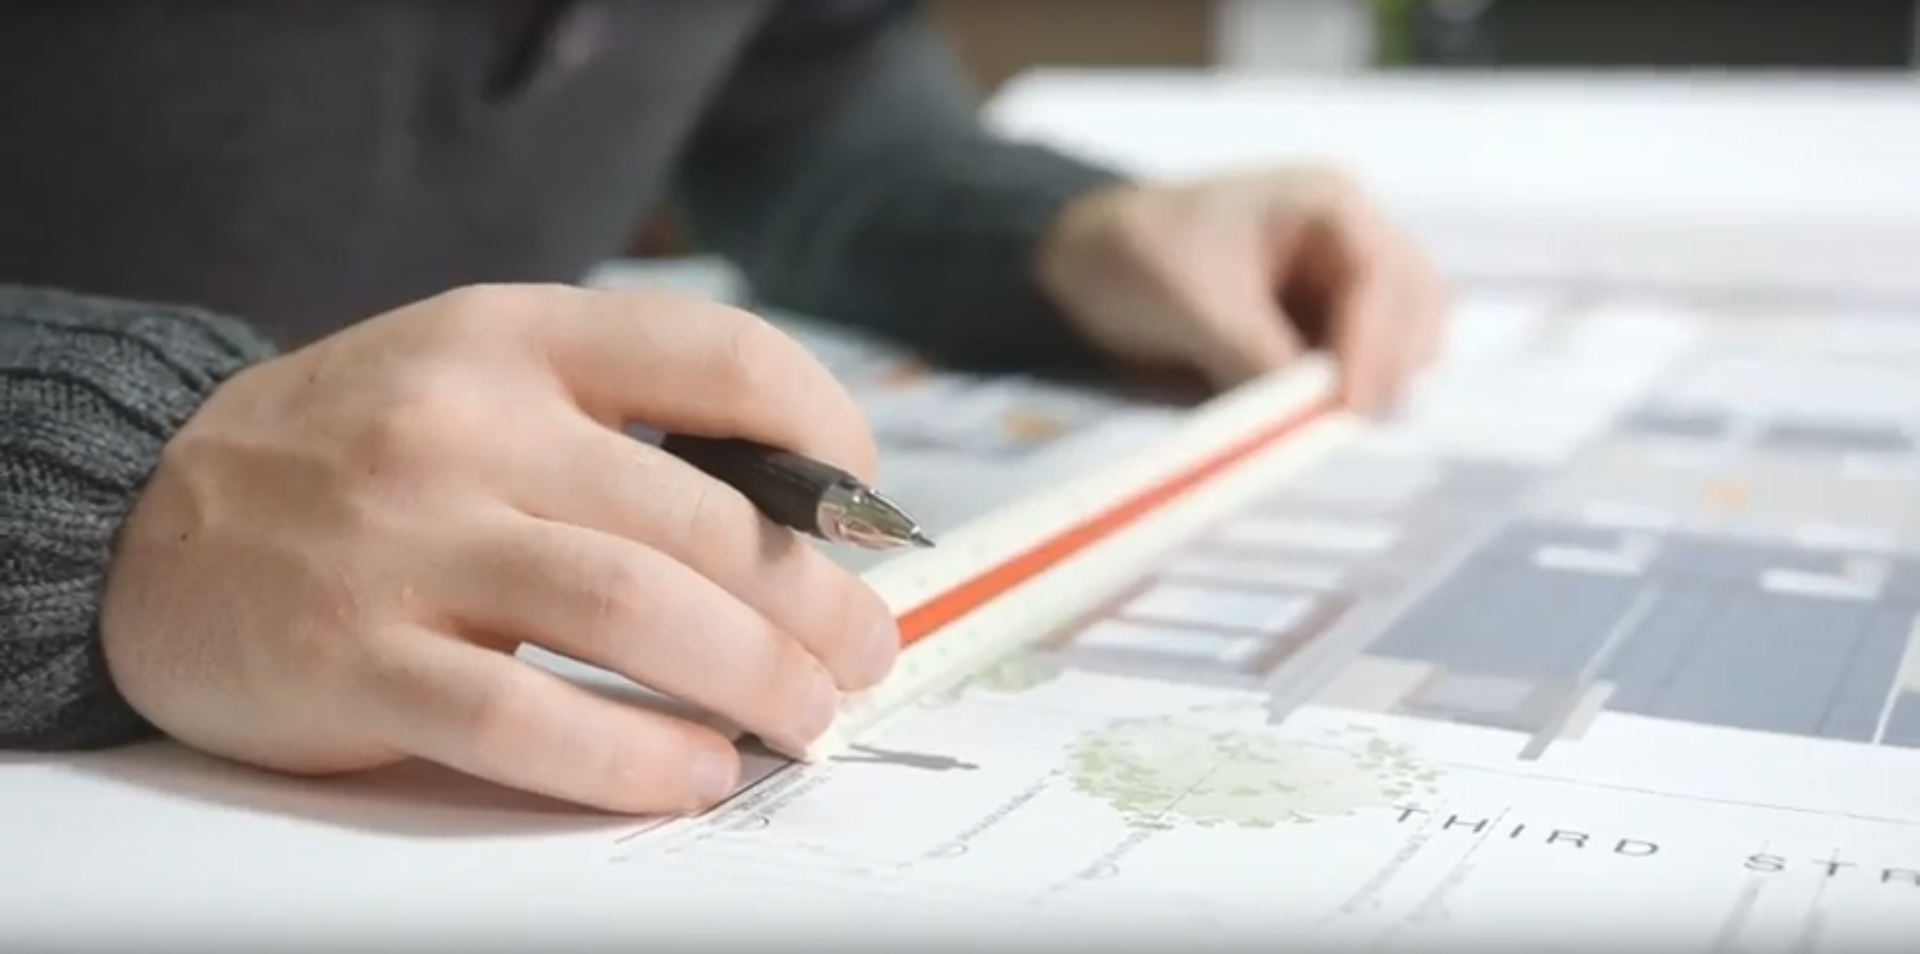 Photo of a municipal planner reviewing building plans. The planner's hands are holding a pen and a ruler and are resting on a set of plans depicting a residential building.